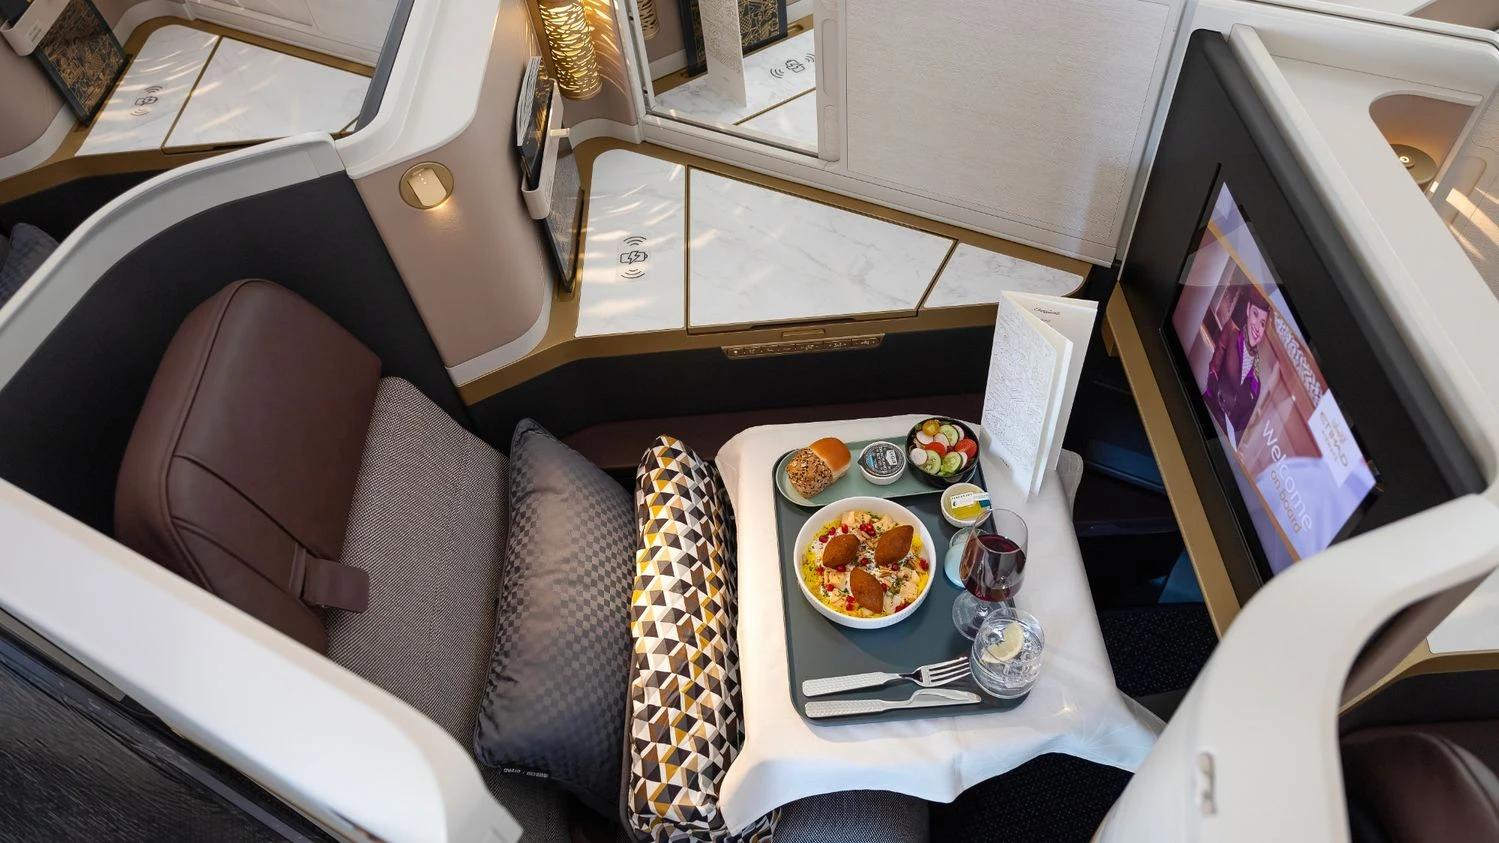 Etihad will debut it's new Business Class on the Boeing 787-9 Dreamliner.